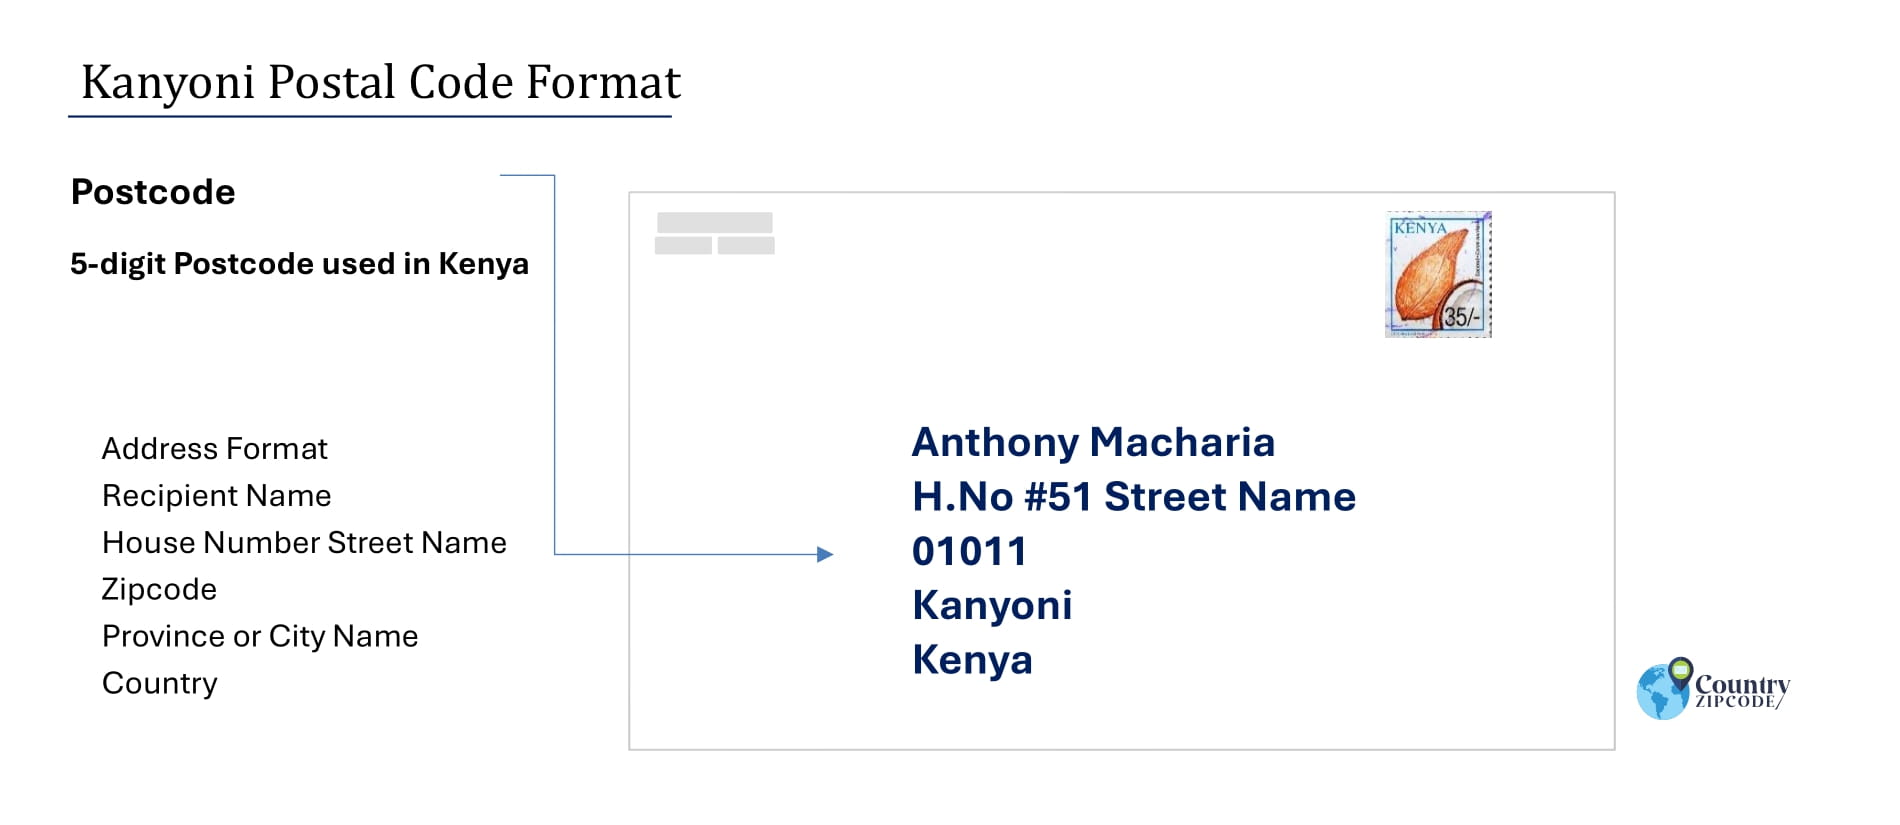 Example of Kanyoni Address and postal code format